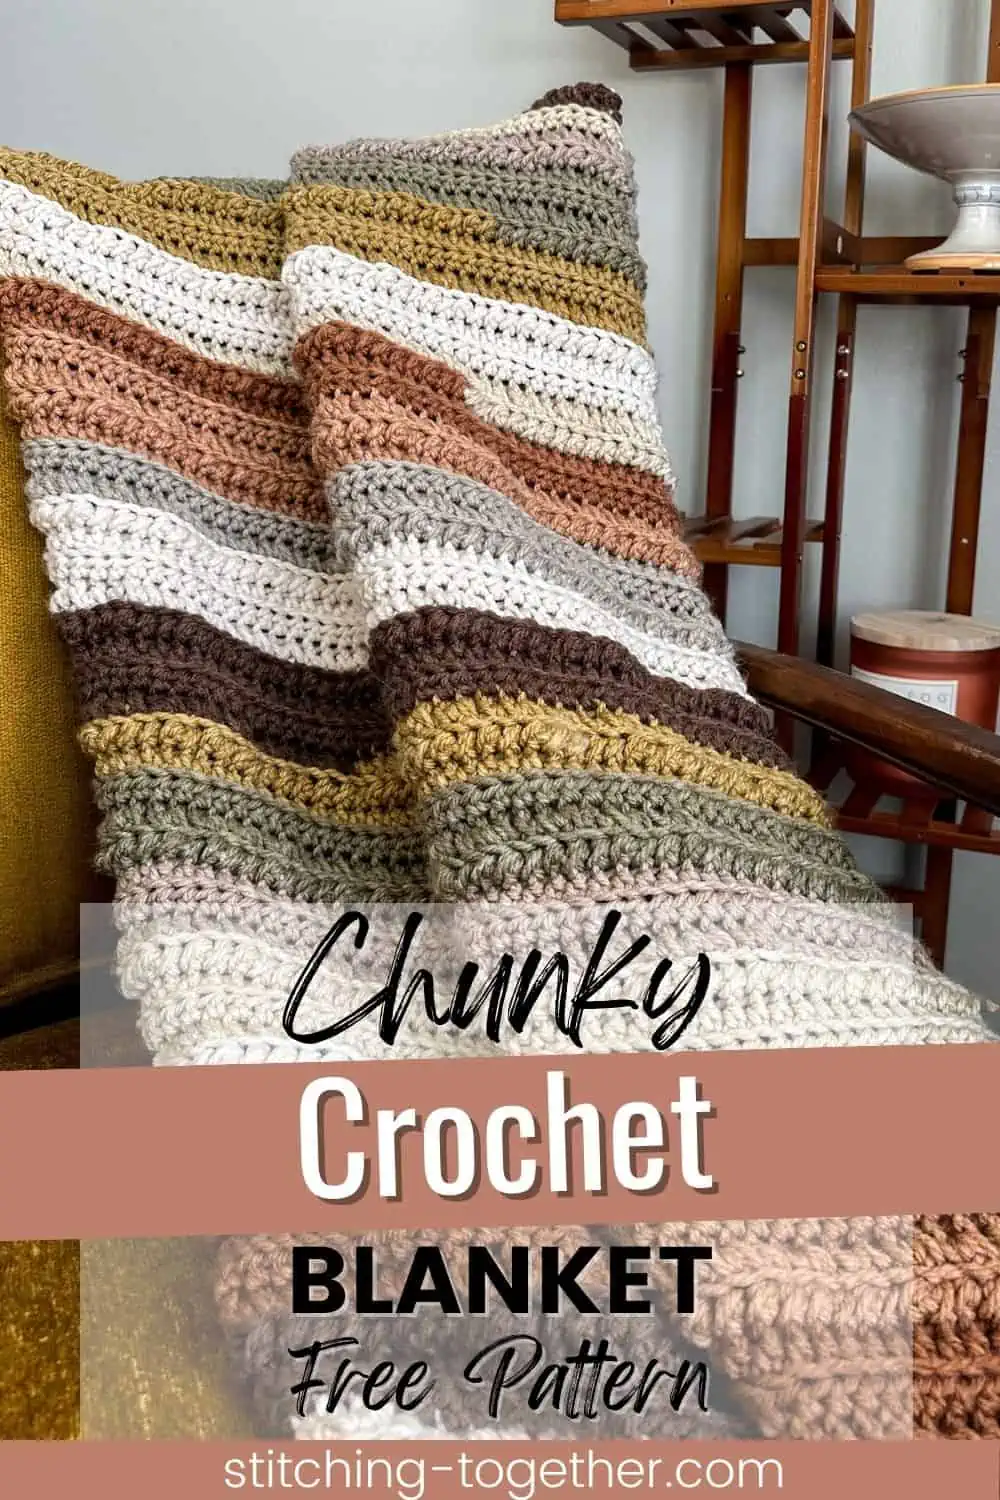 striped crochet blanket draped on a chair with text overlay reading "chunky crochet  blanket free pattern"